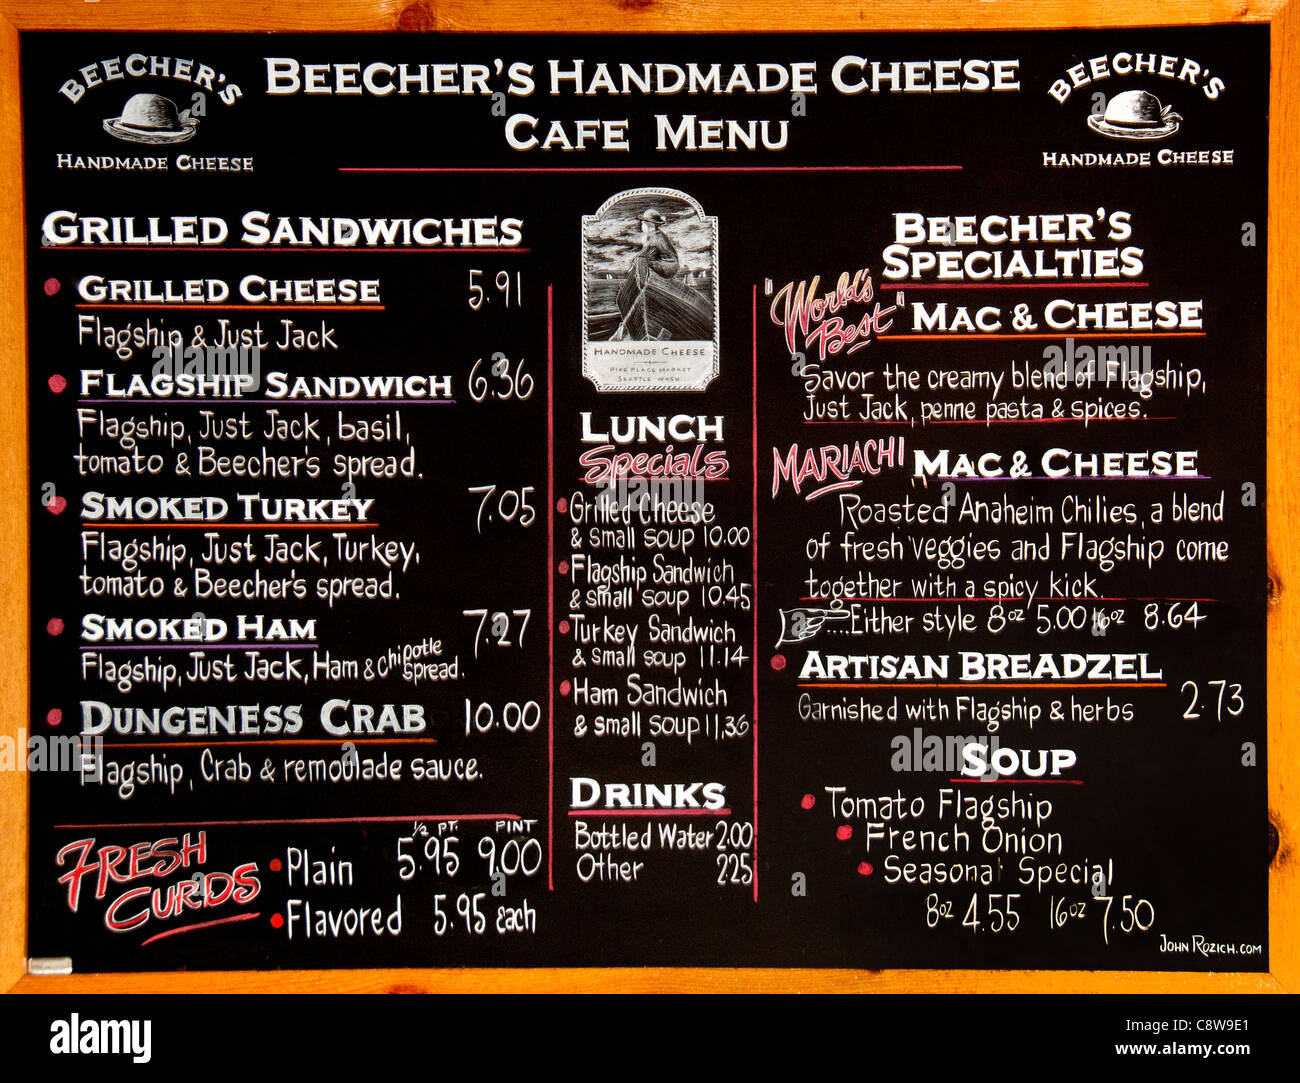 Beechers's Restaurant Cafe Seattle Farmers Market Town City Washington State United States of America USA Stock Photo